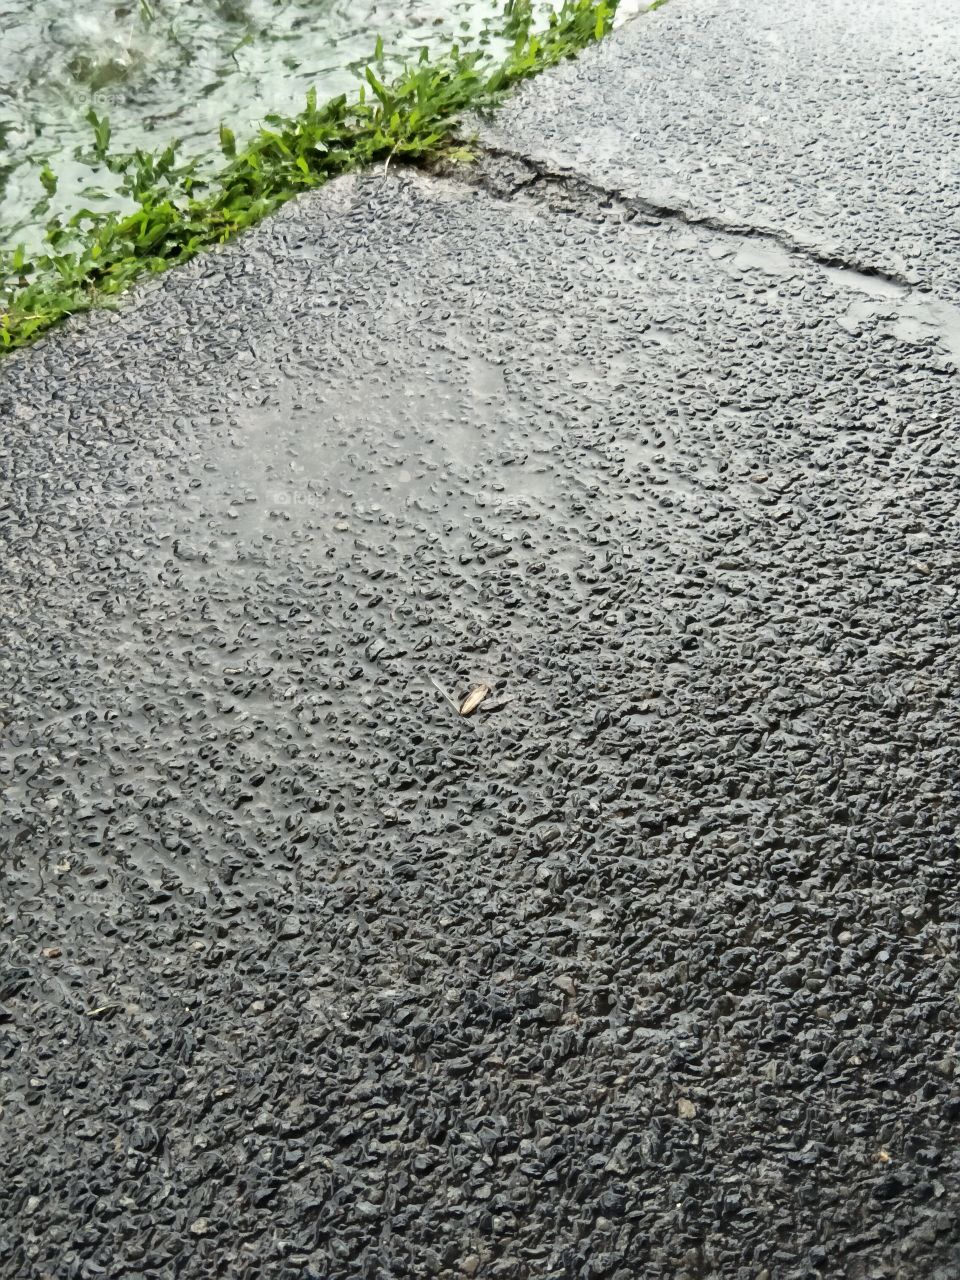 Rain puddle in a pavement